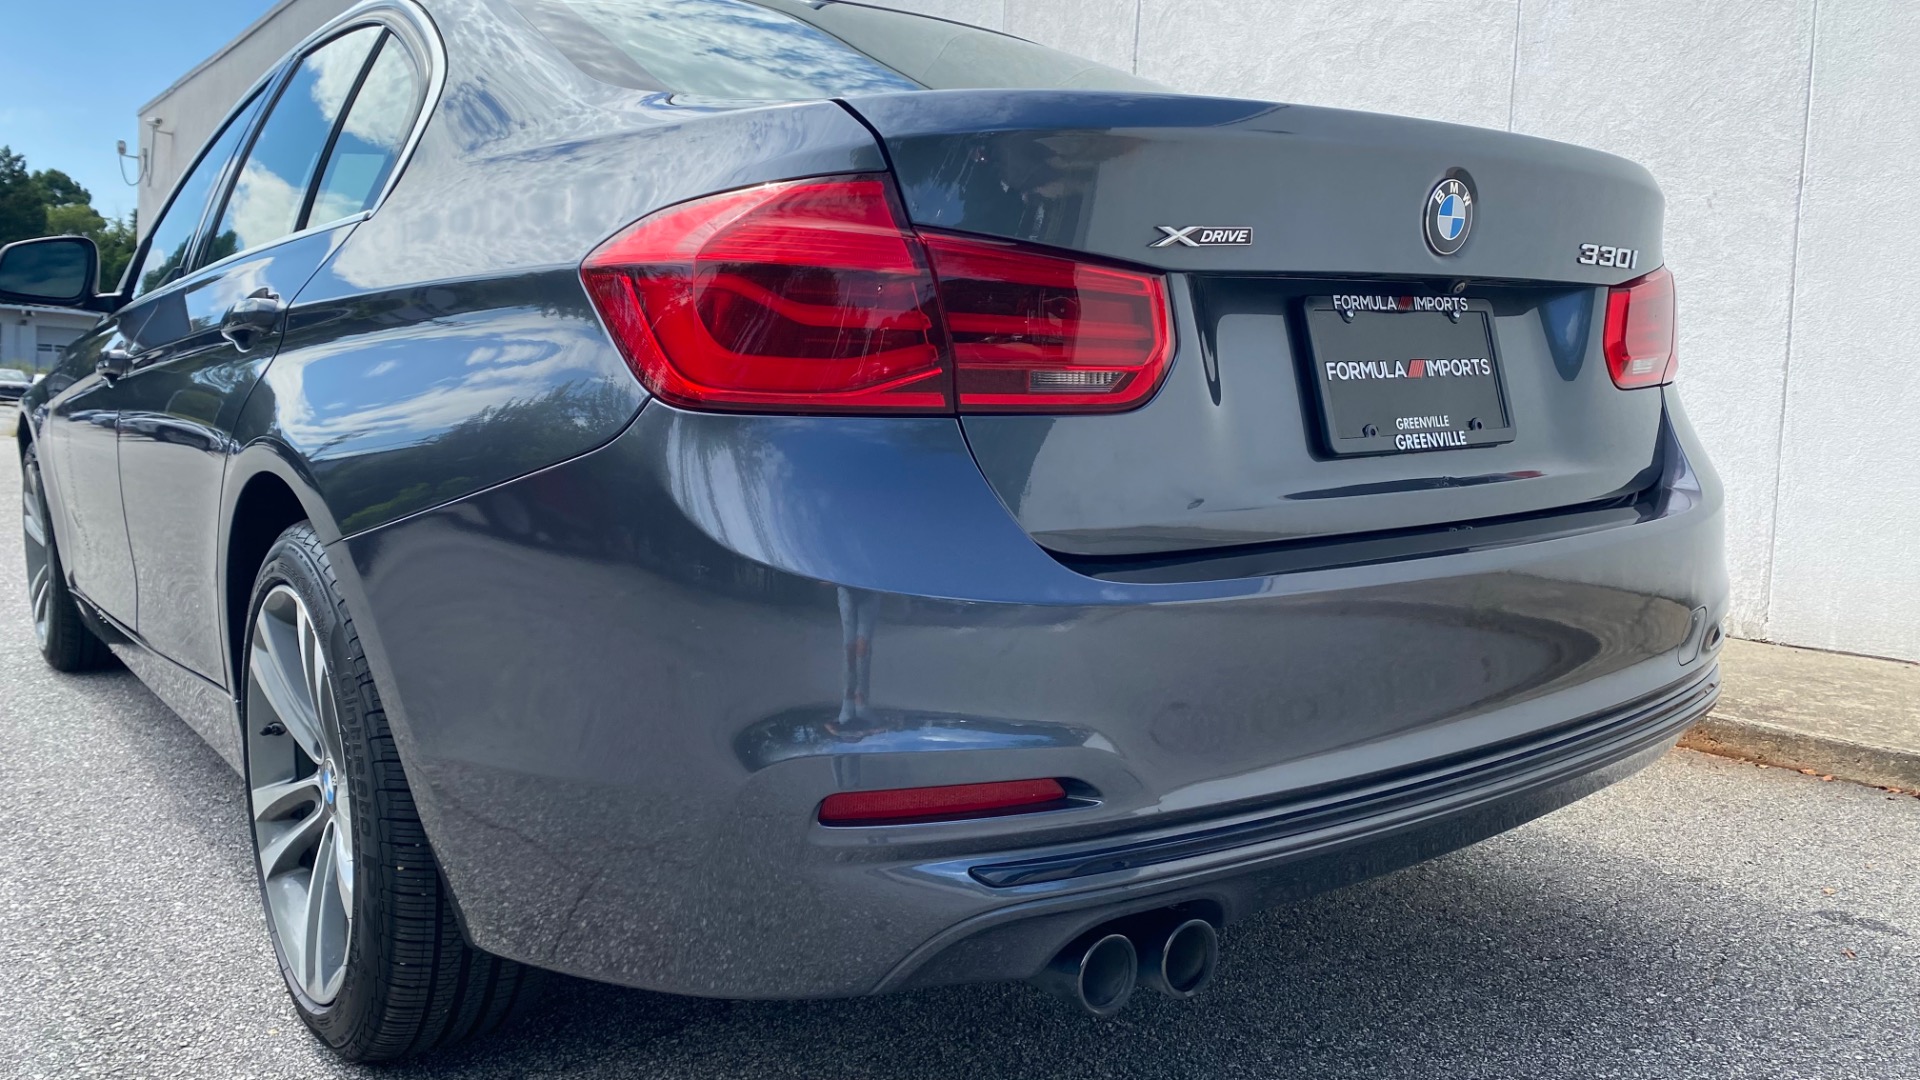 Used 2018 BMW 3 SERIES 330I XDRIVE / CONV PKG / SUNROOF / SPORT STS / HTD STS / REARVIE for sale Sold at Formula Imports in Charlotte NC 28227 7